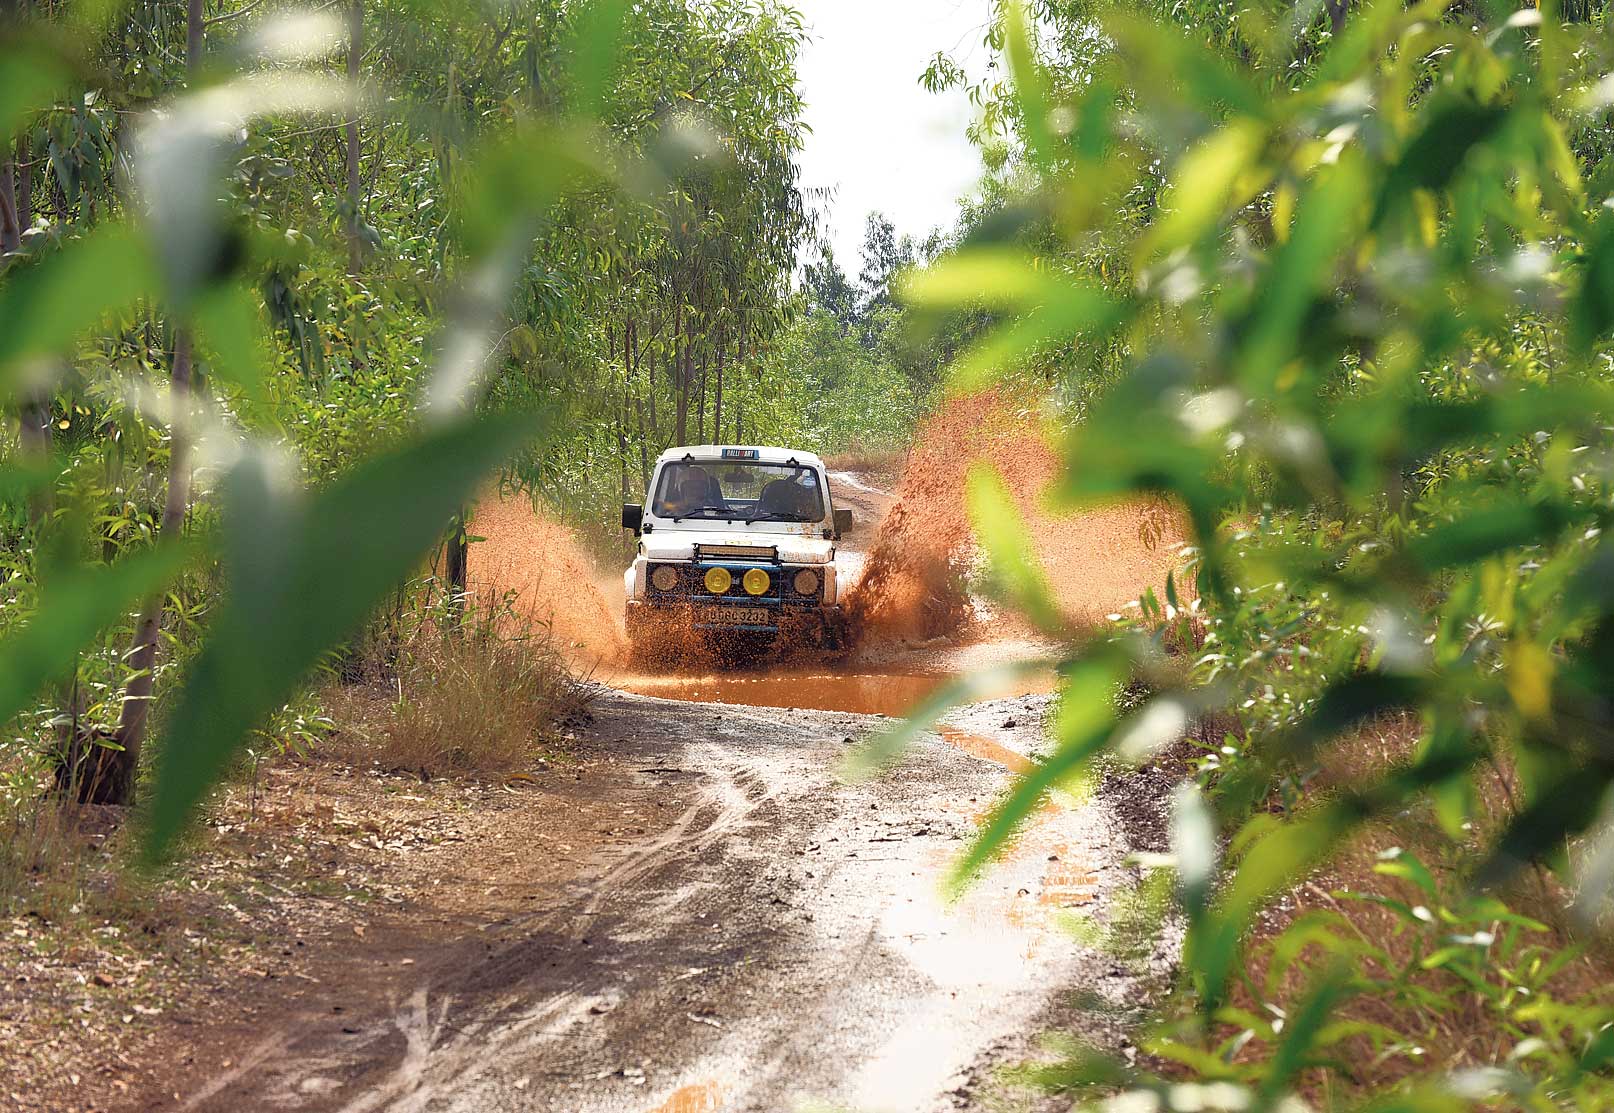 Participant at the Servo Jangalmahal on the Move 2, in association with The Telegraph, negotiates a dirt track on Sunday